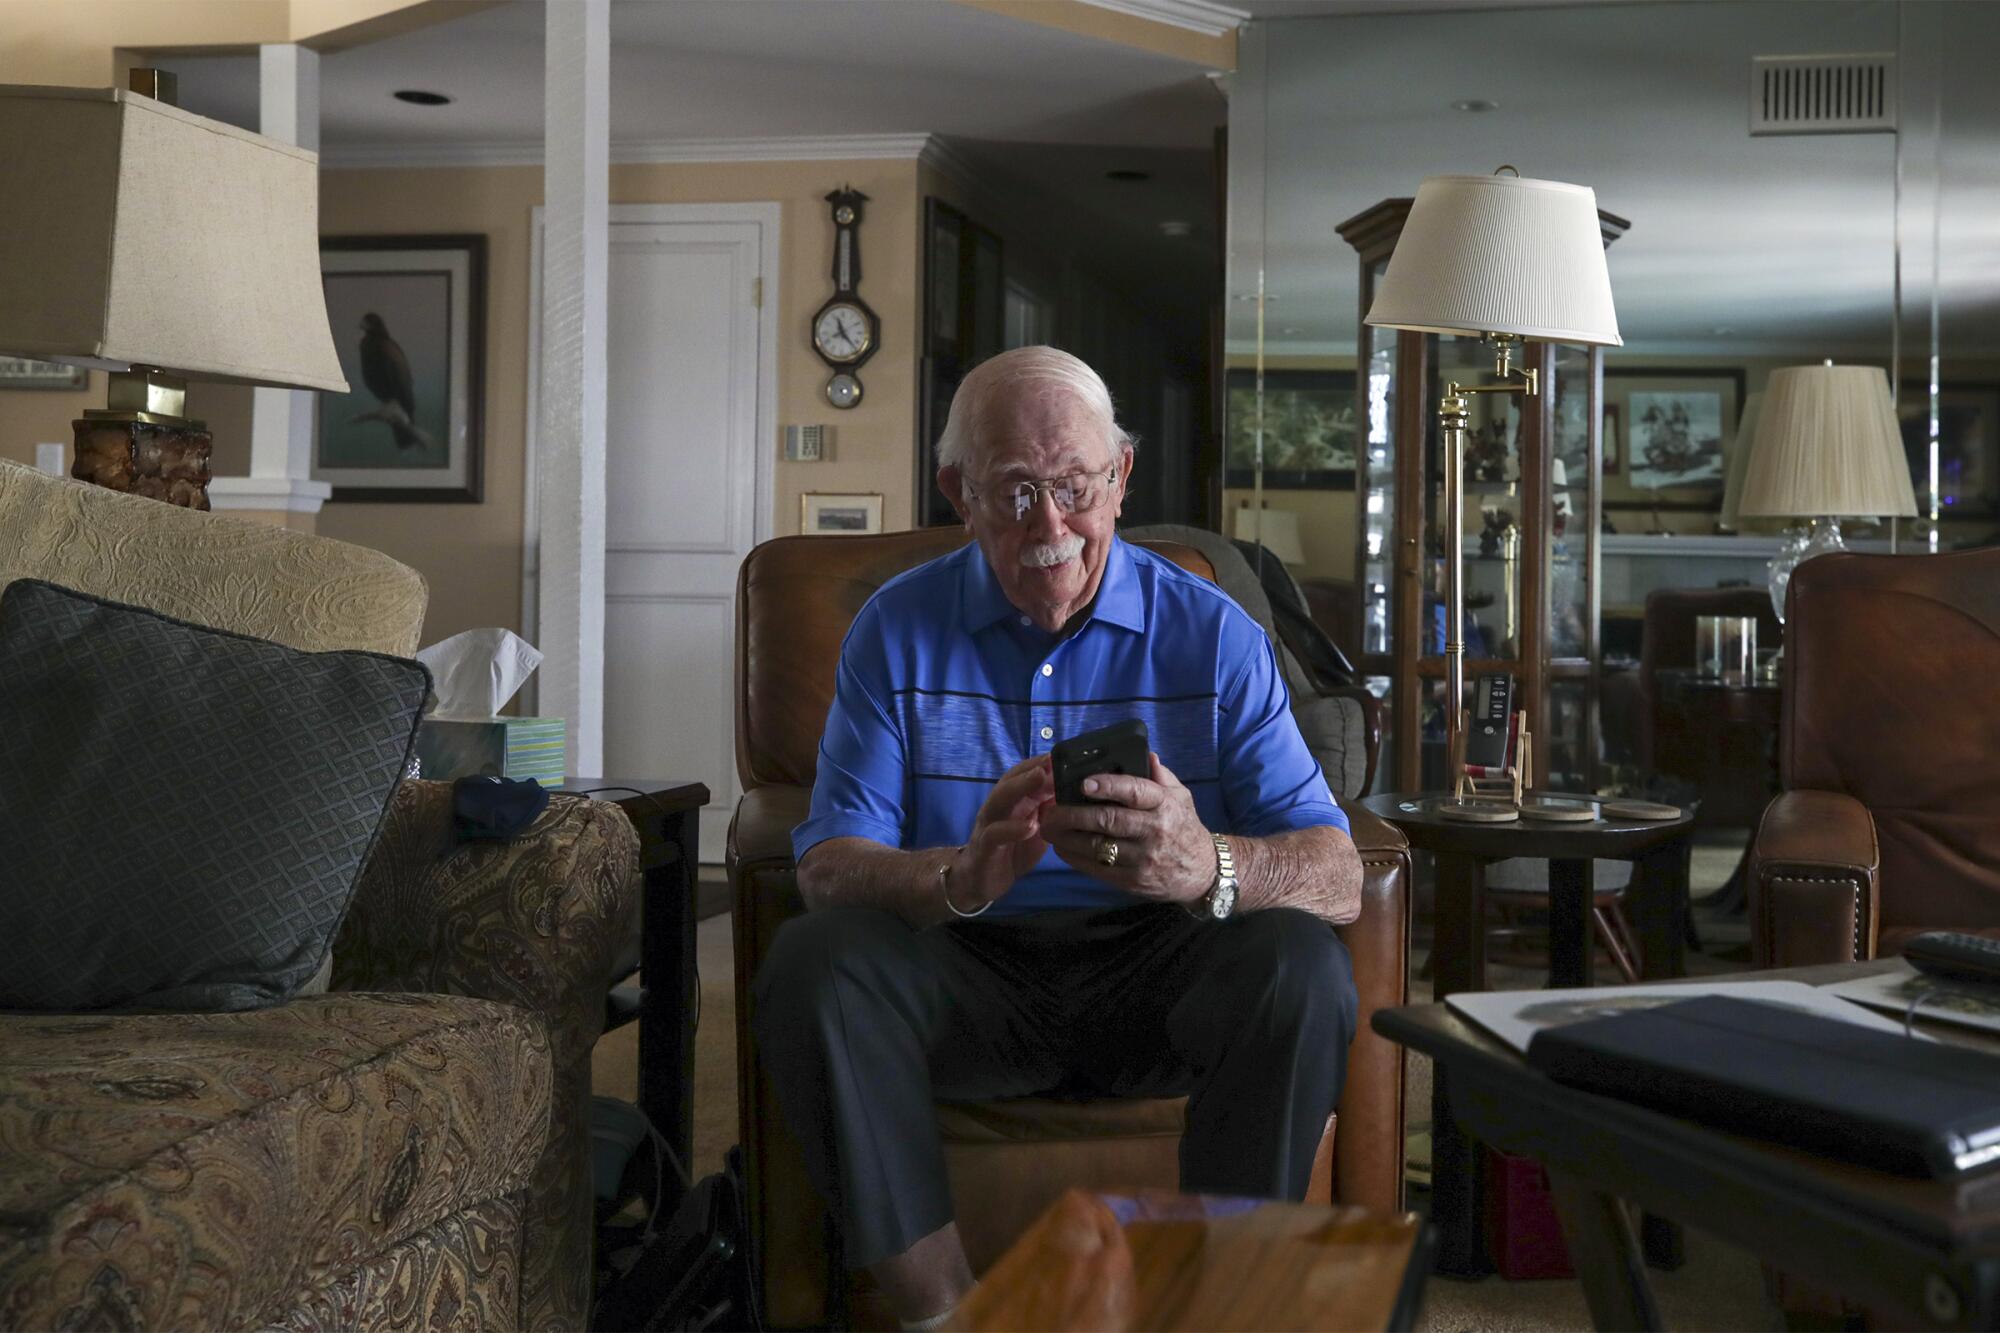 A man sits in a chair at home looking at his phone